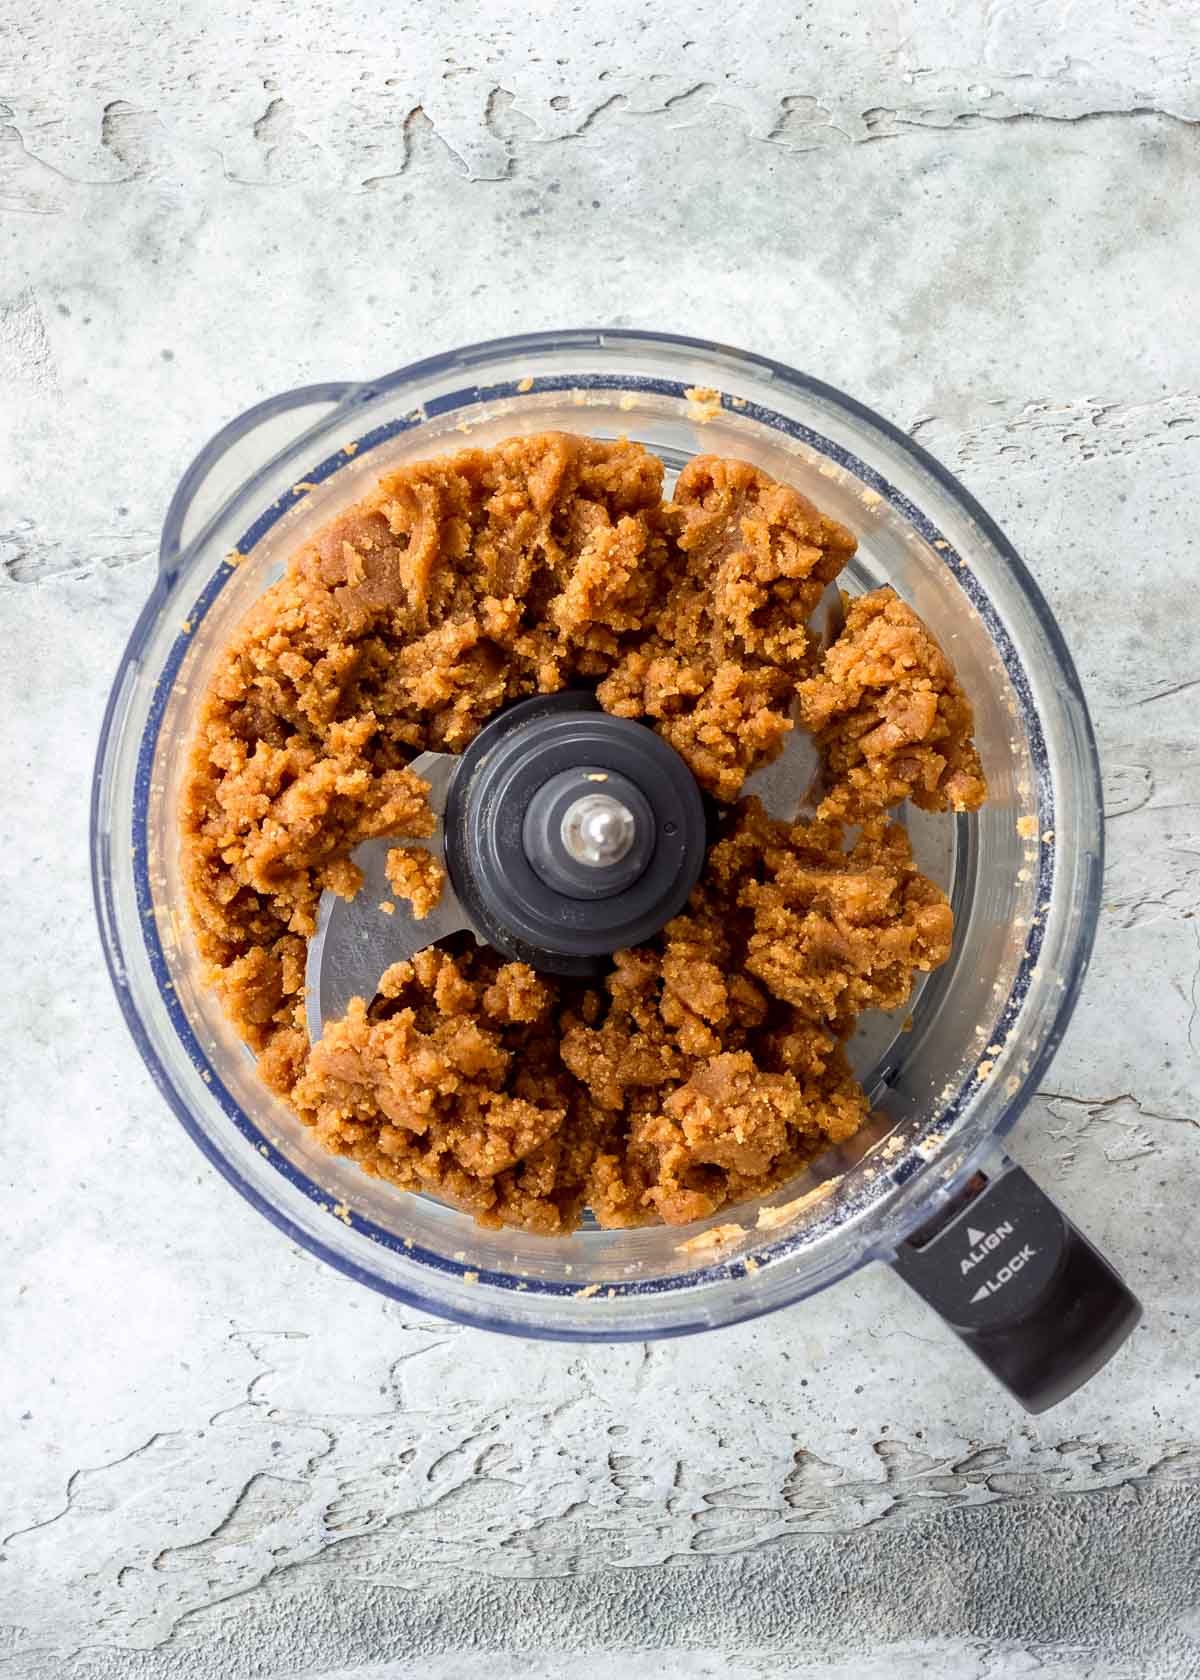 Peanut butter and dates combined together in a food processor.